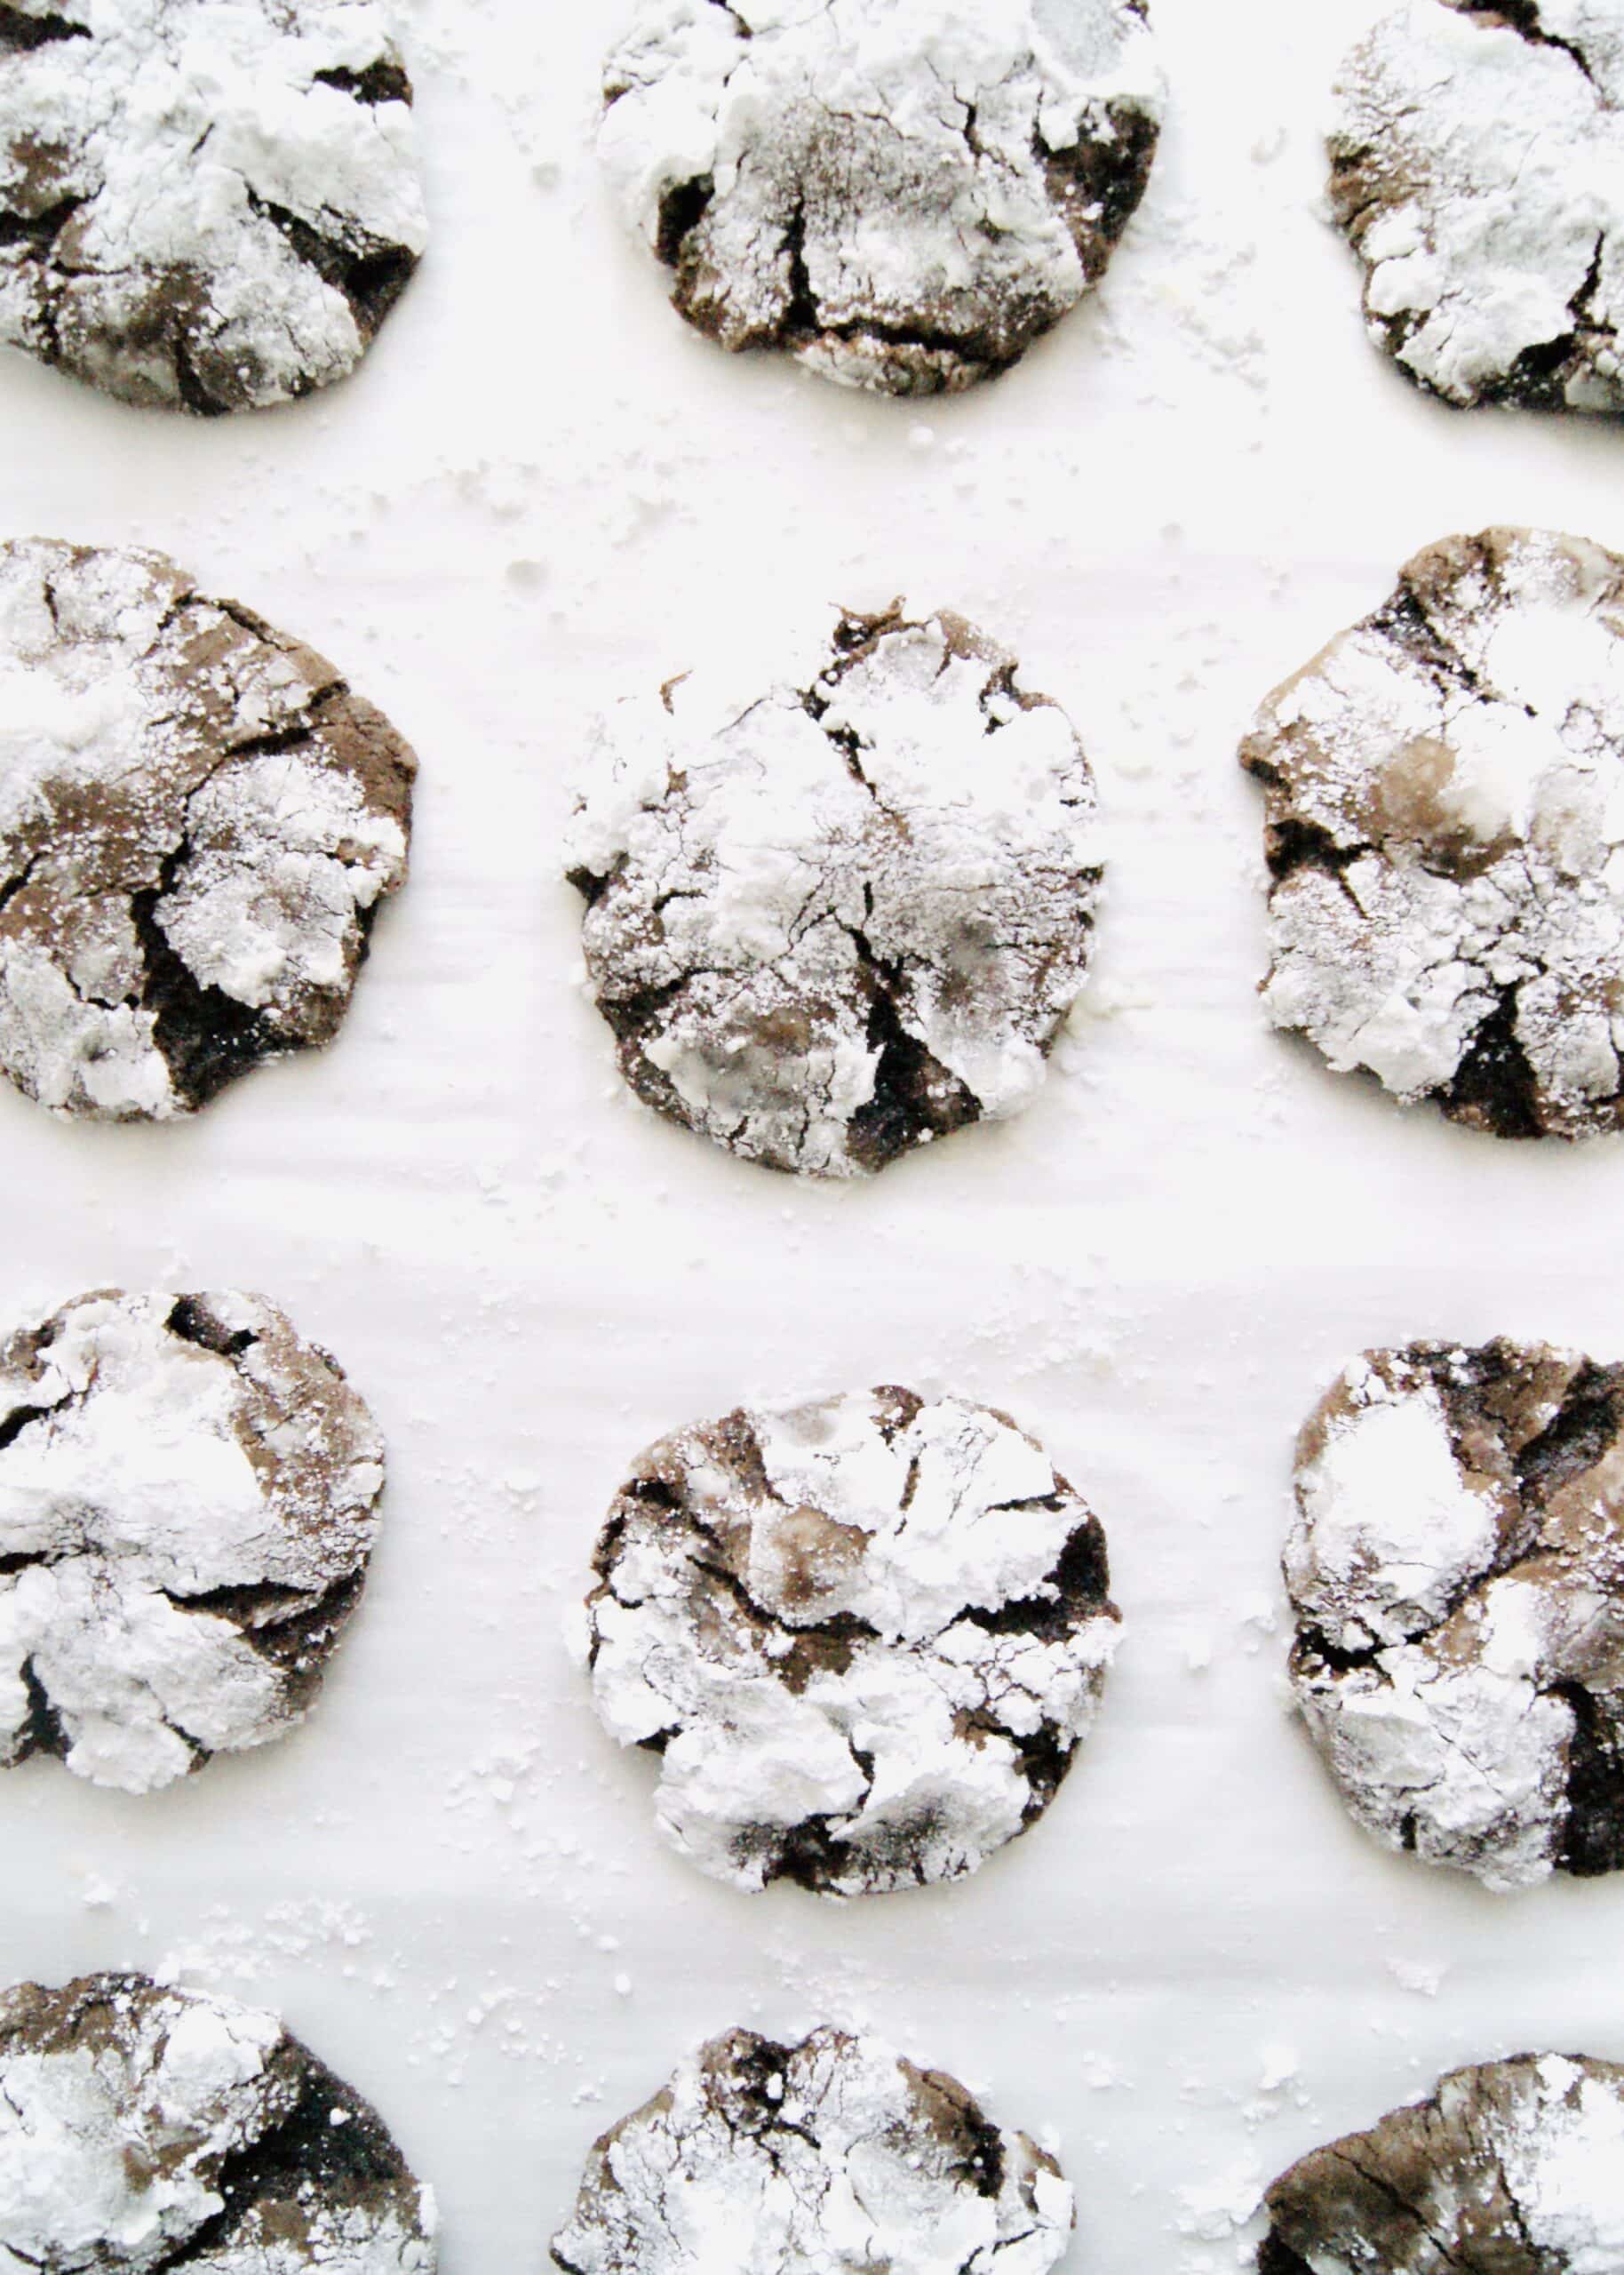 Chocolate Crinkle Cookies are a traditional Christmas Cookie and always a crowd favorite. These chocolate cookies are thick, soft, and resemble a brownie in a cookie! Recipe at KathleensCravings.com #kathleenscravings #christmascookies #holidaycookies #chocolatecookies #crinklecookies